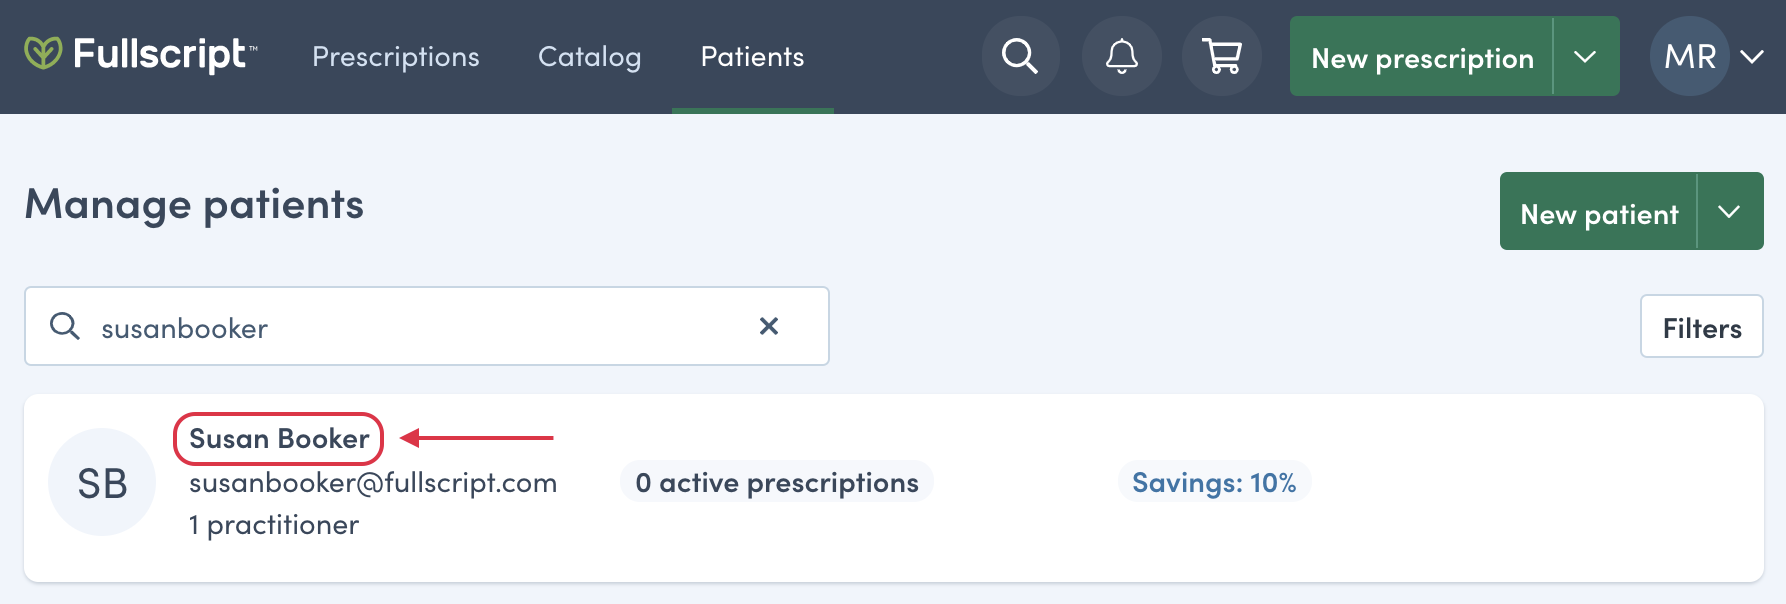 Select the patient's name to access their profile.